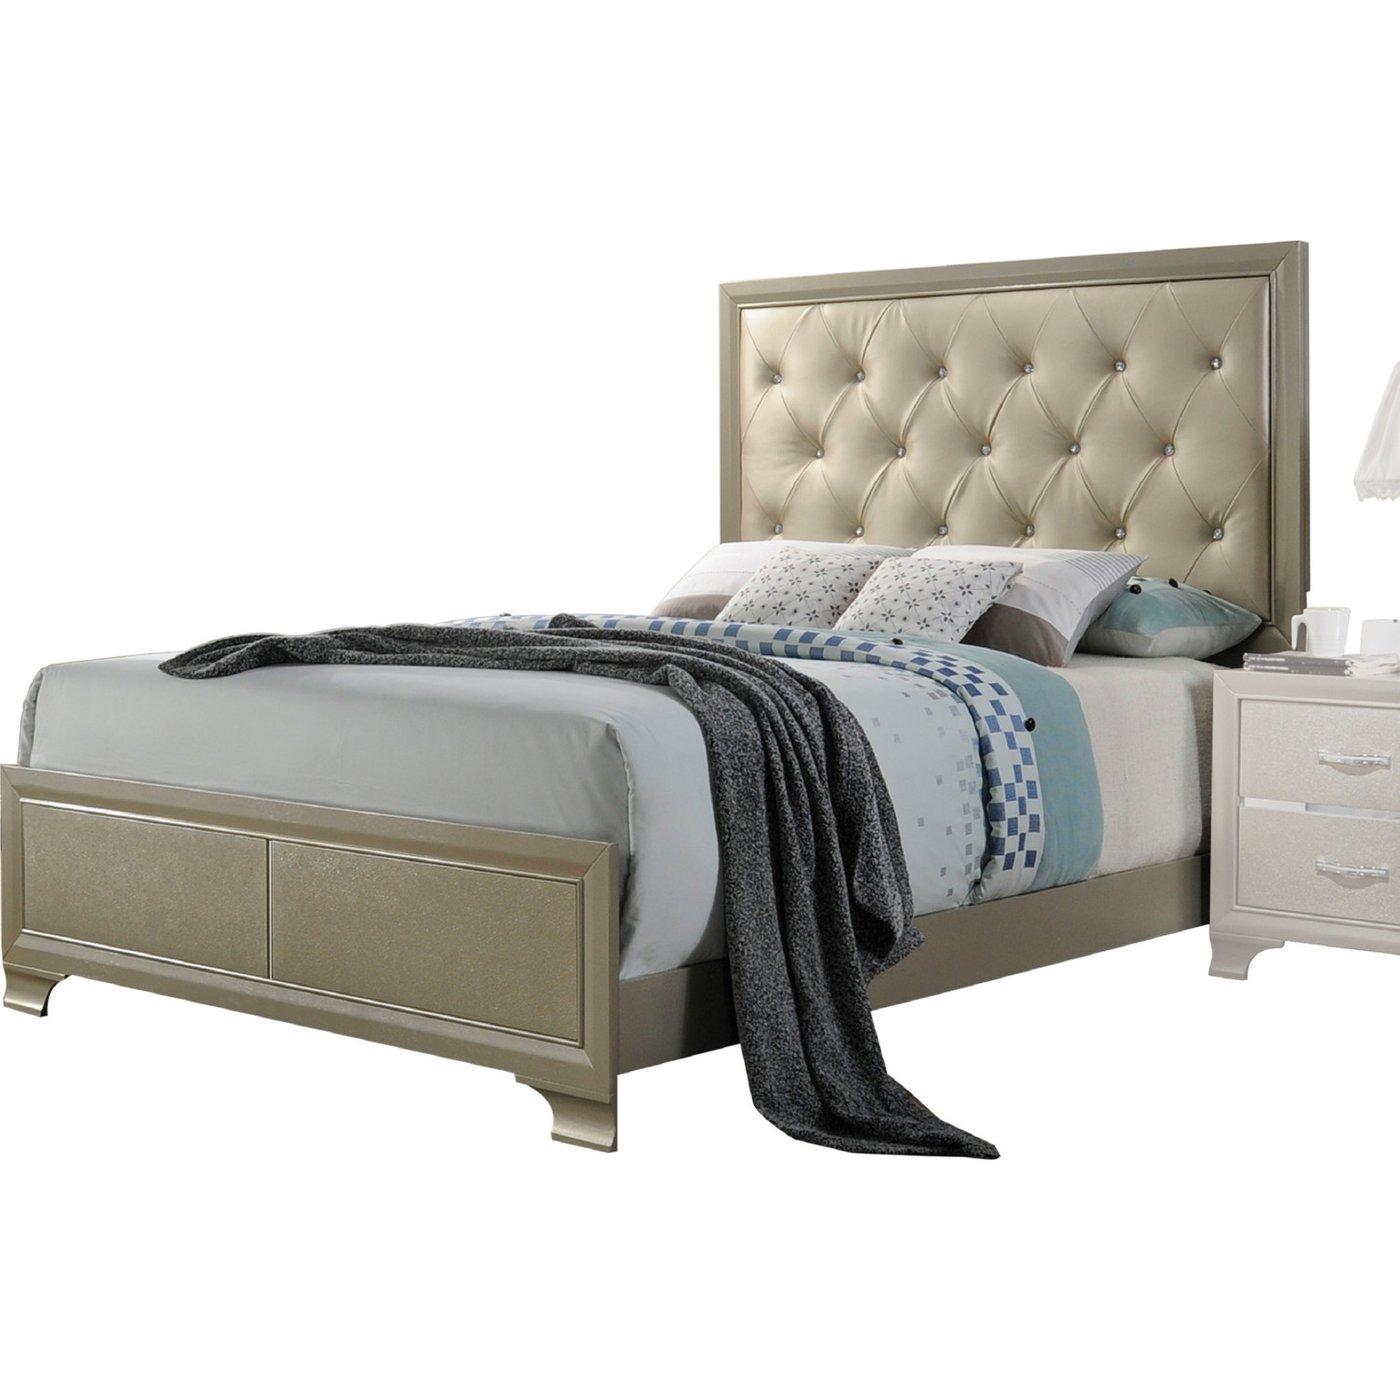 Transitional Panel Bed Carine-26240Q 26240Q in Champagne Polyurethane